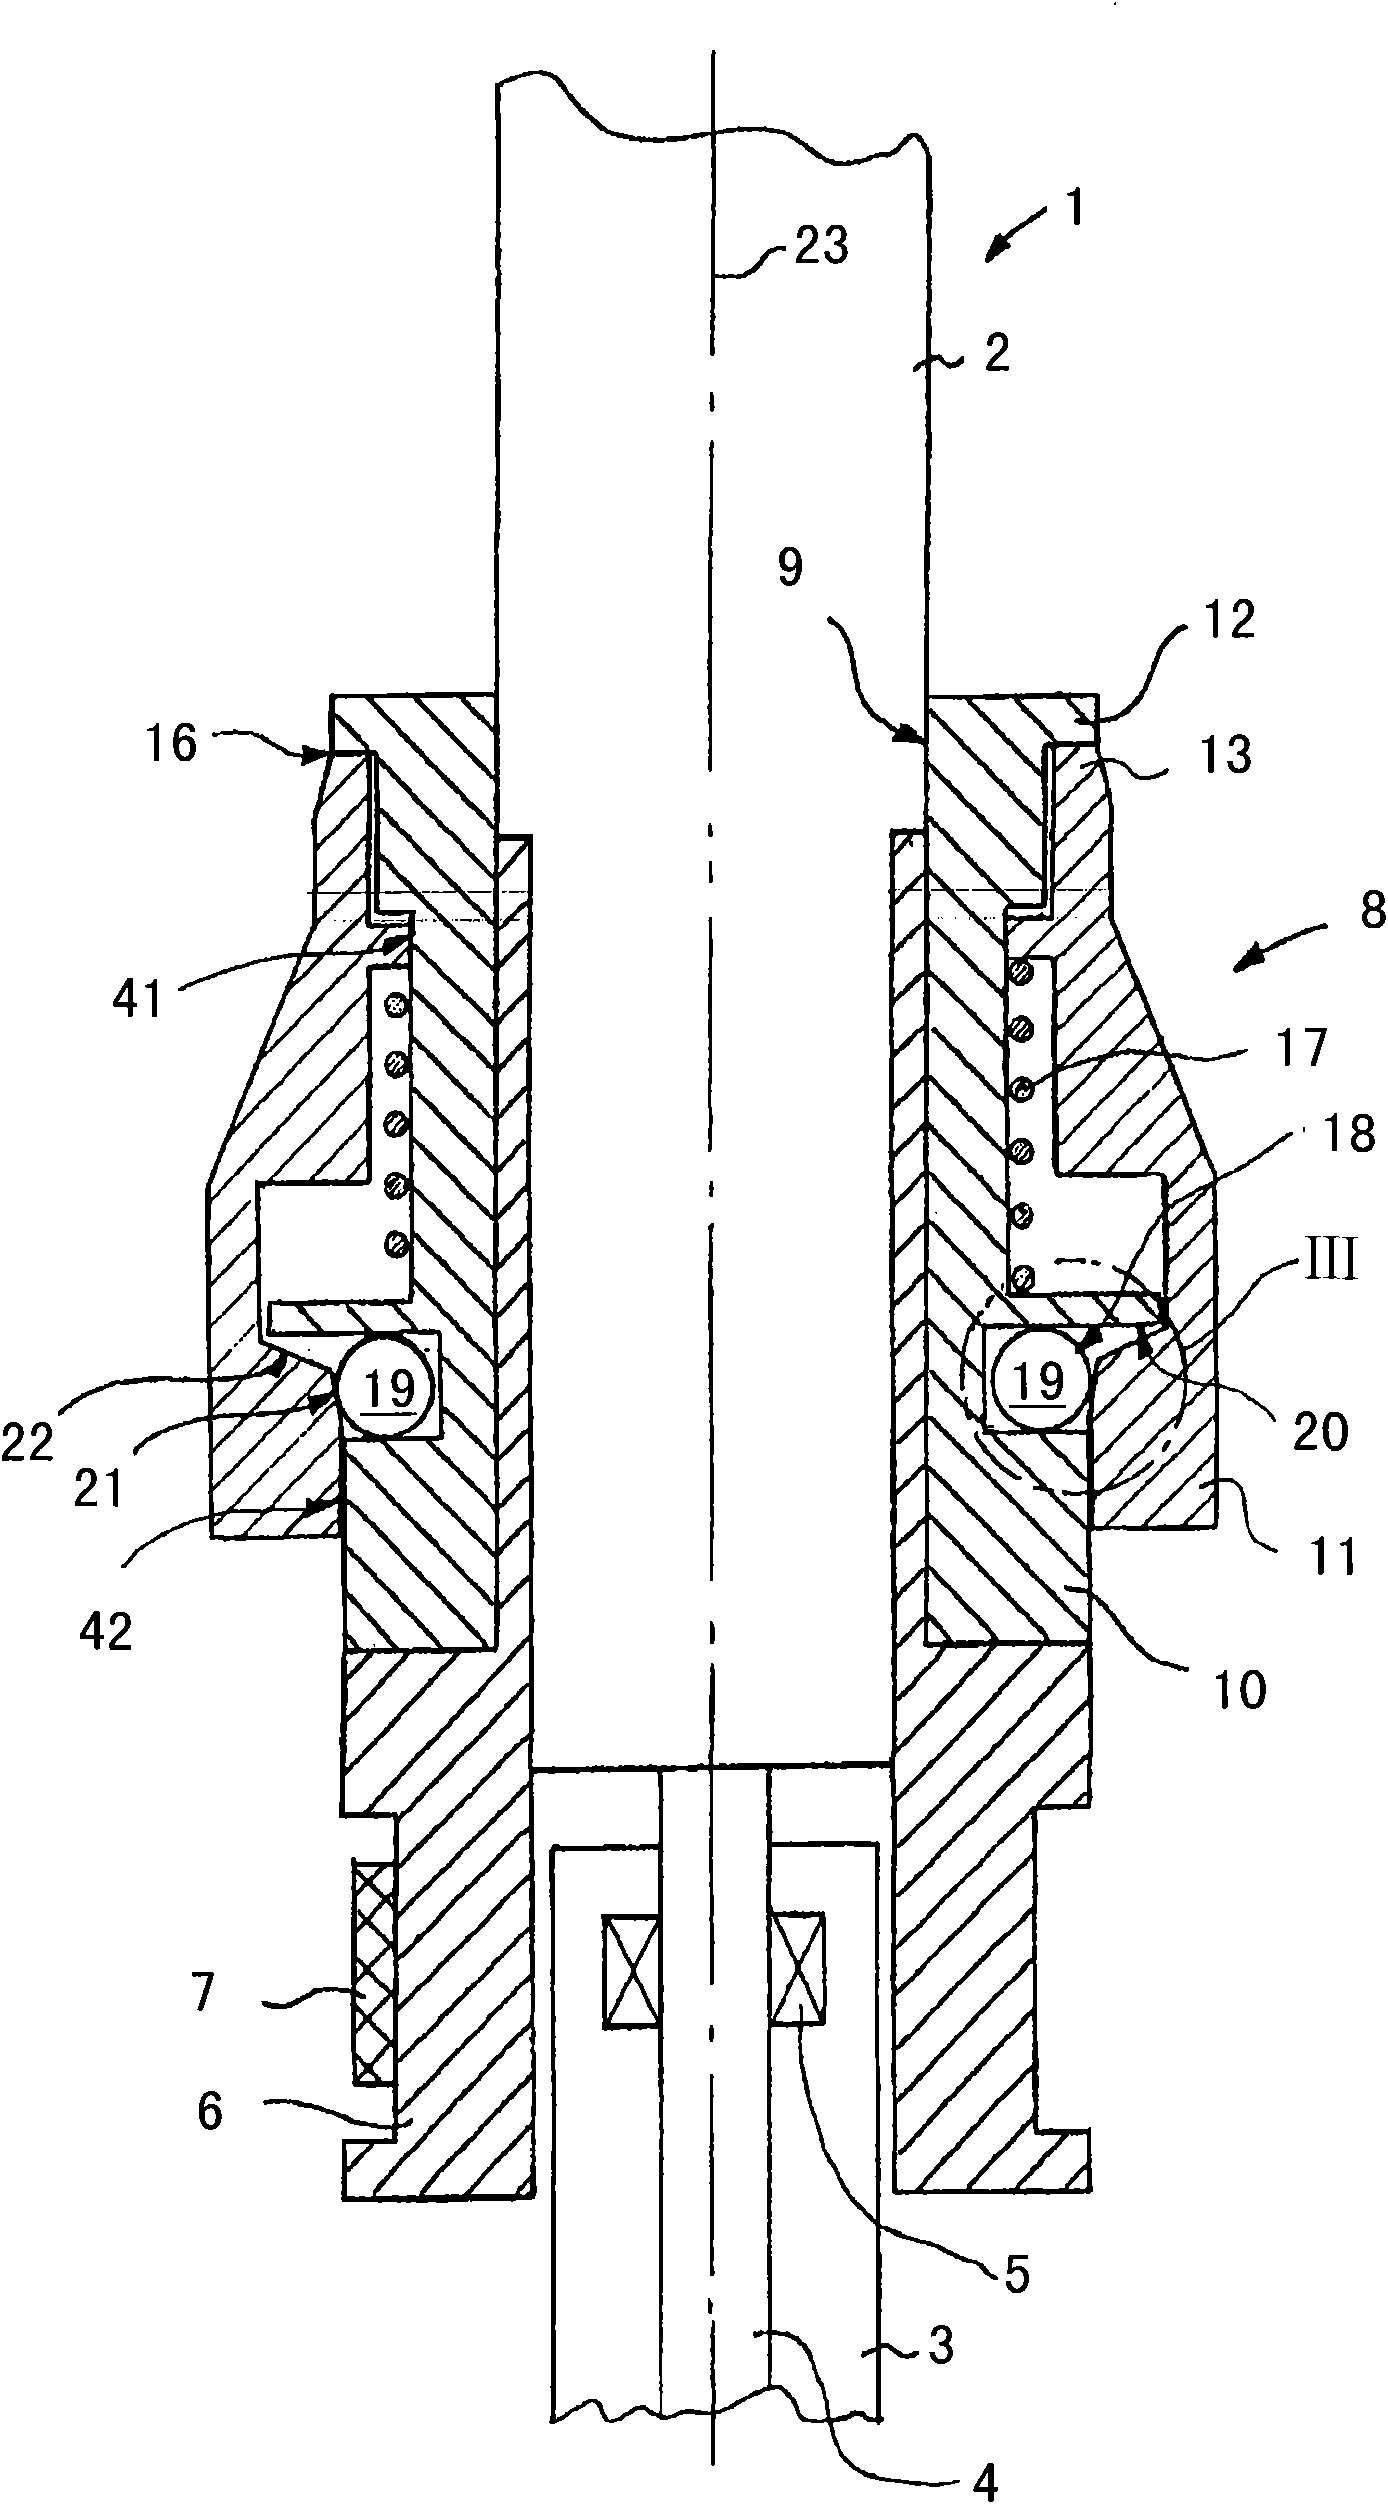 Thread trapper device for a spindle of a spinning or thread machine